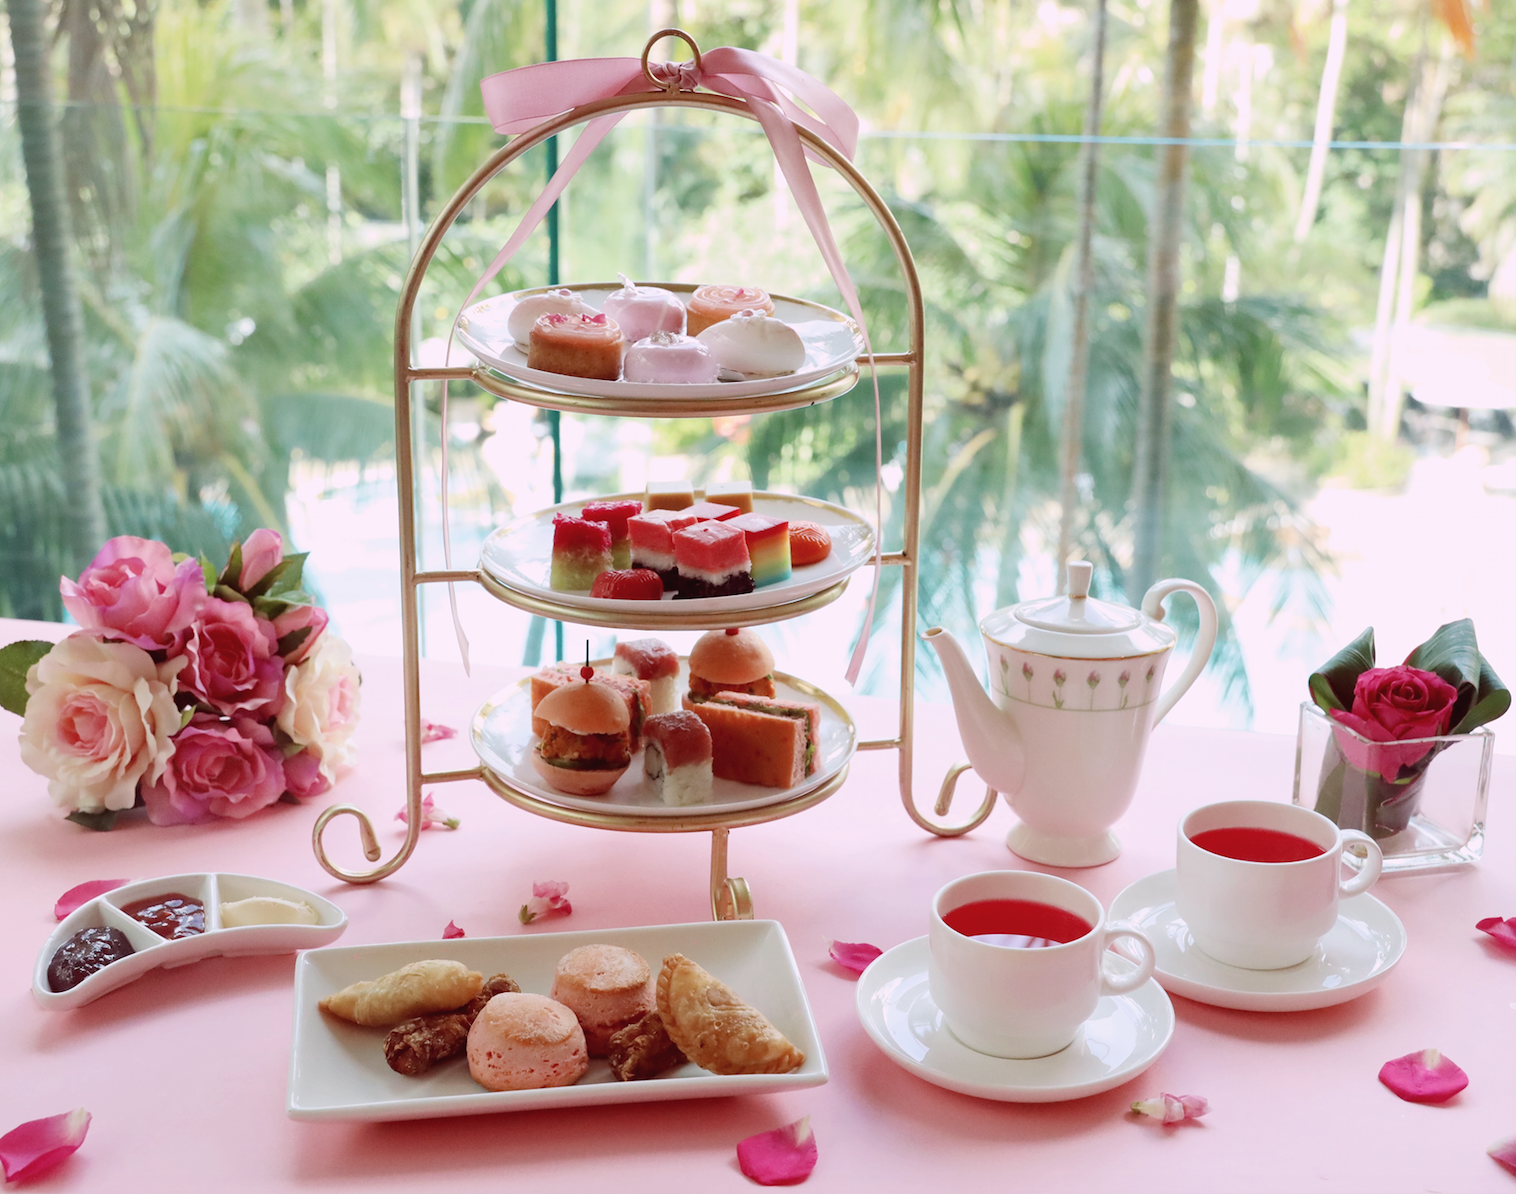 Shangri-La Hotel S'pore launches 3-tier high tea set for 2 at S$42